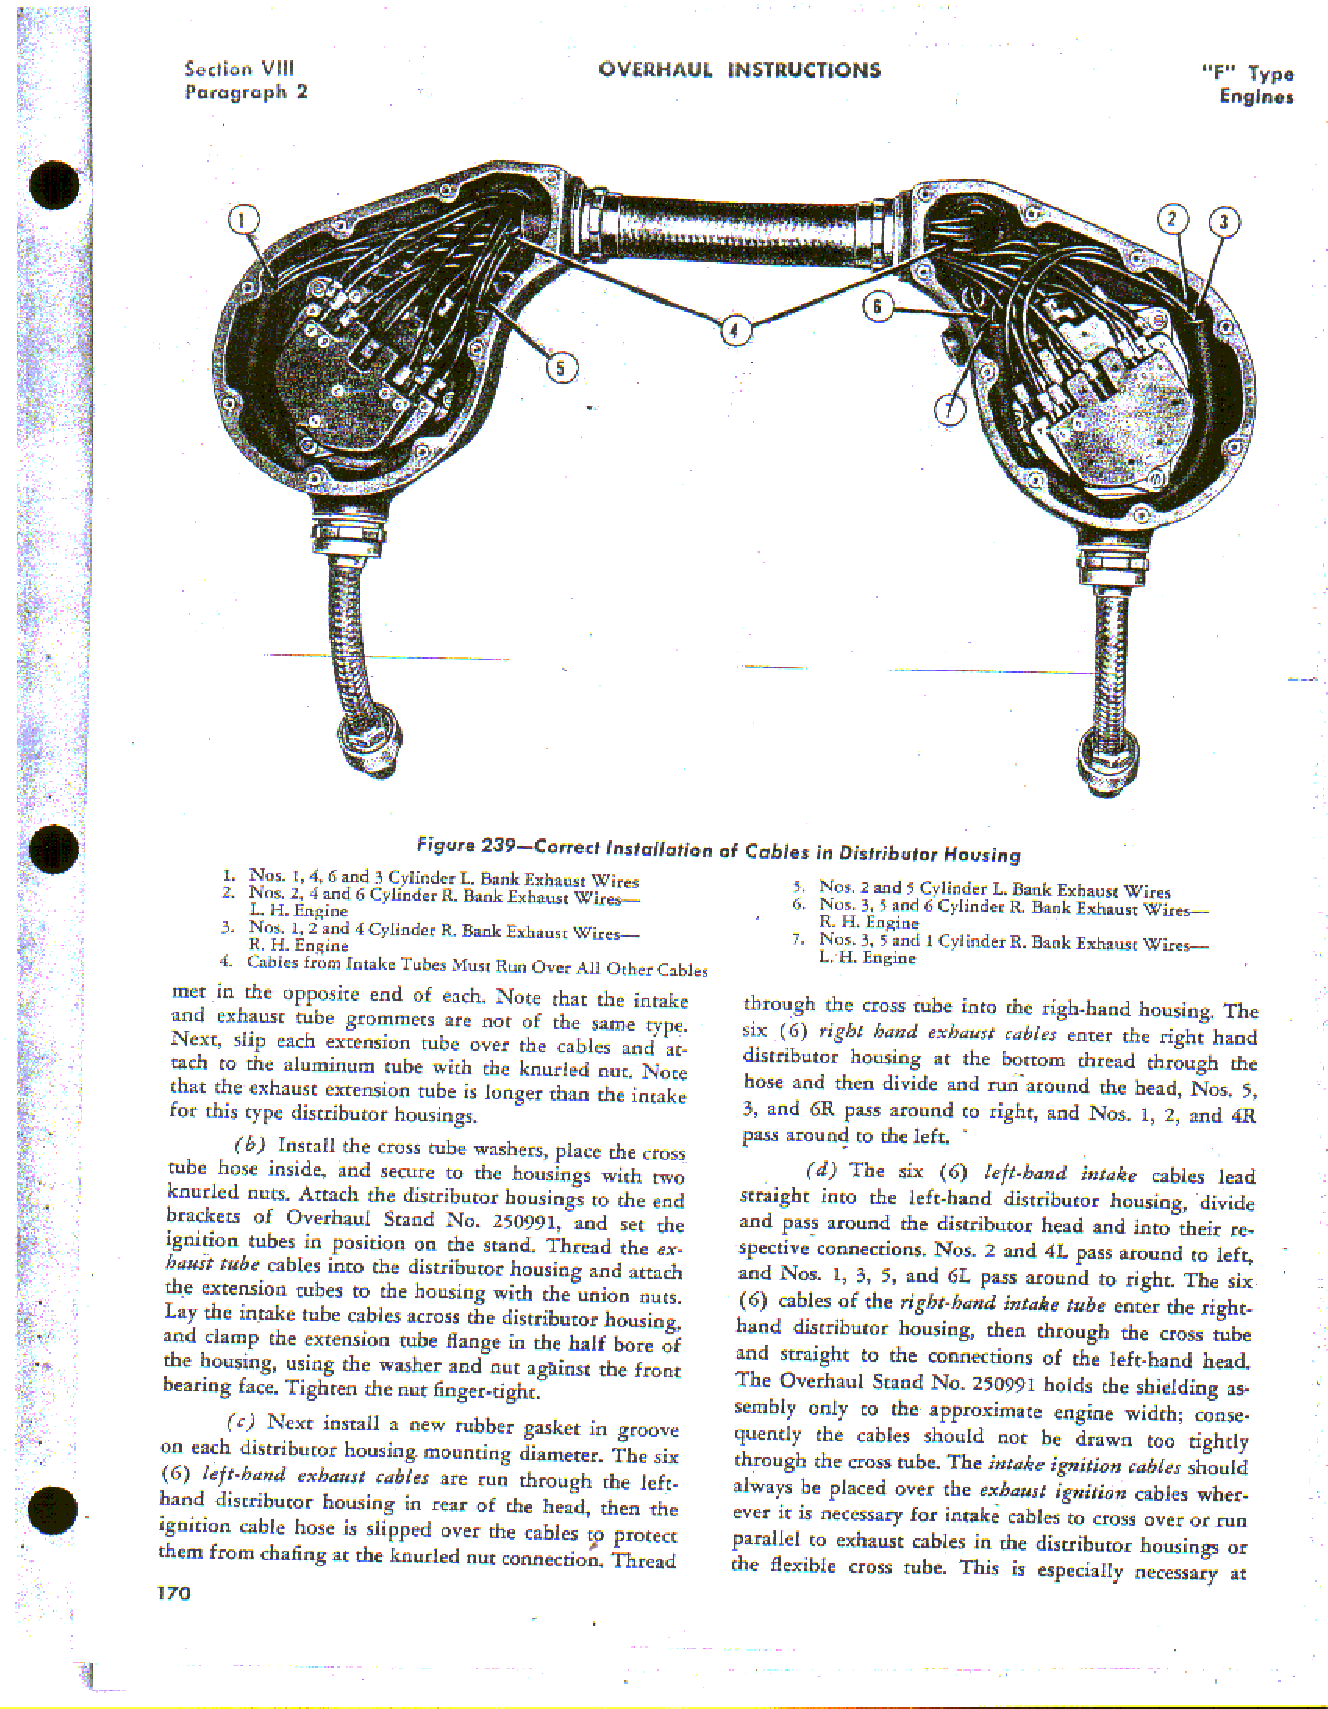 Sample page 178 from AirCorps Library document: Overhaul Bulletin - Allison Engine - V-1710-F